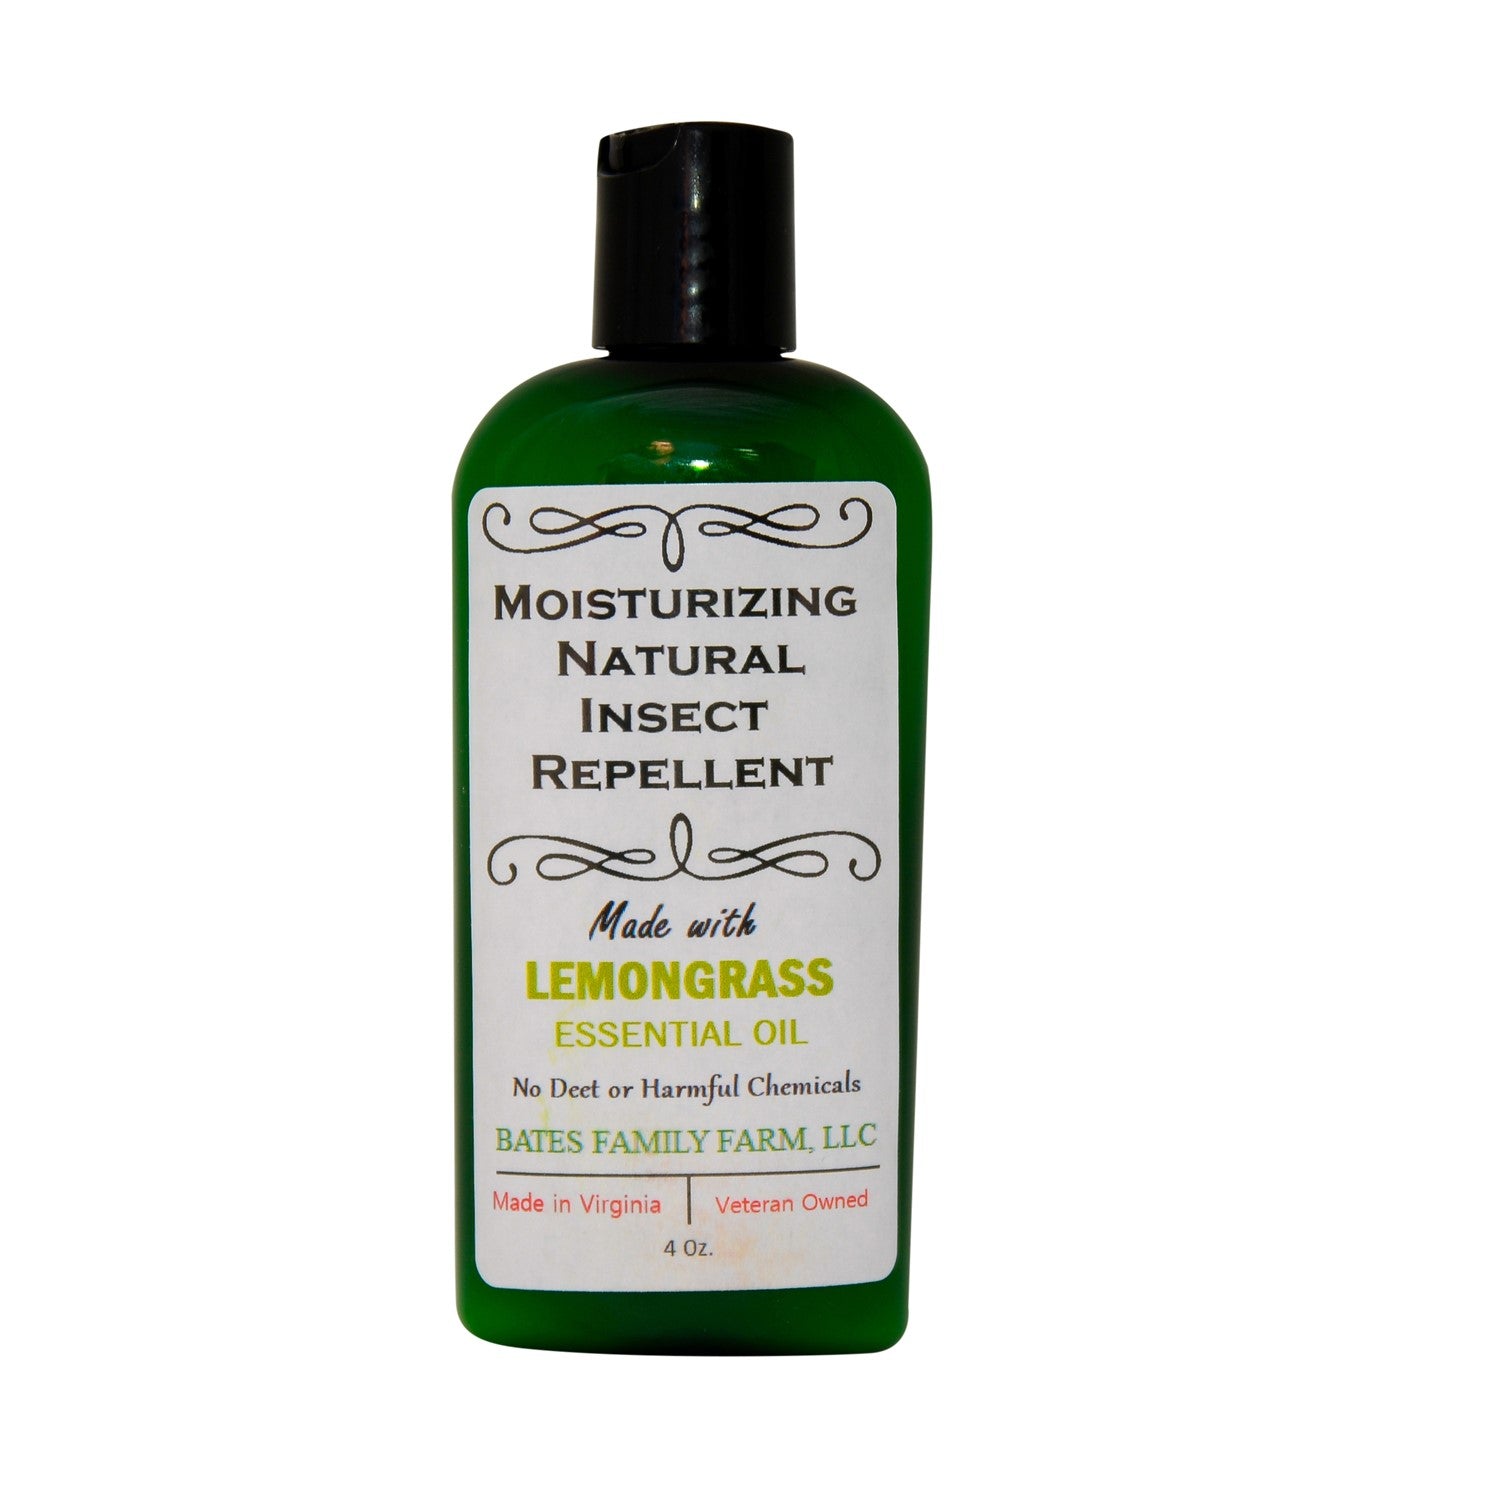 Natural Insect Repellent - Lemongrass